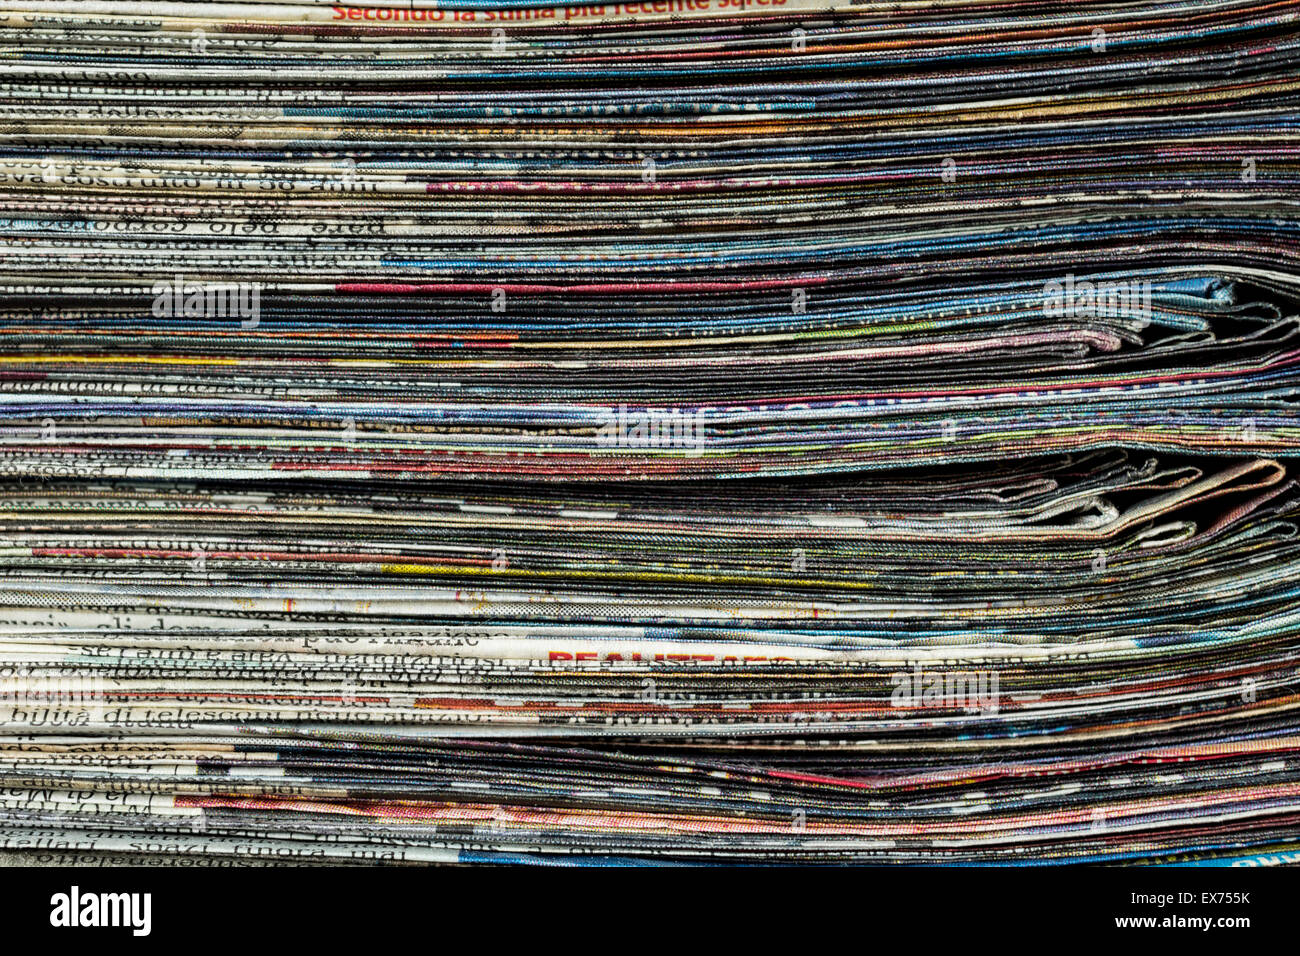 A pile of newspapers Stock Photo